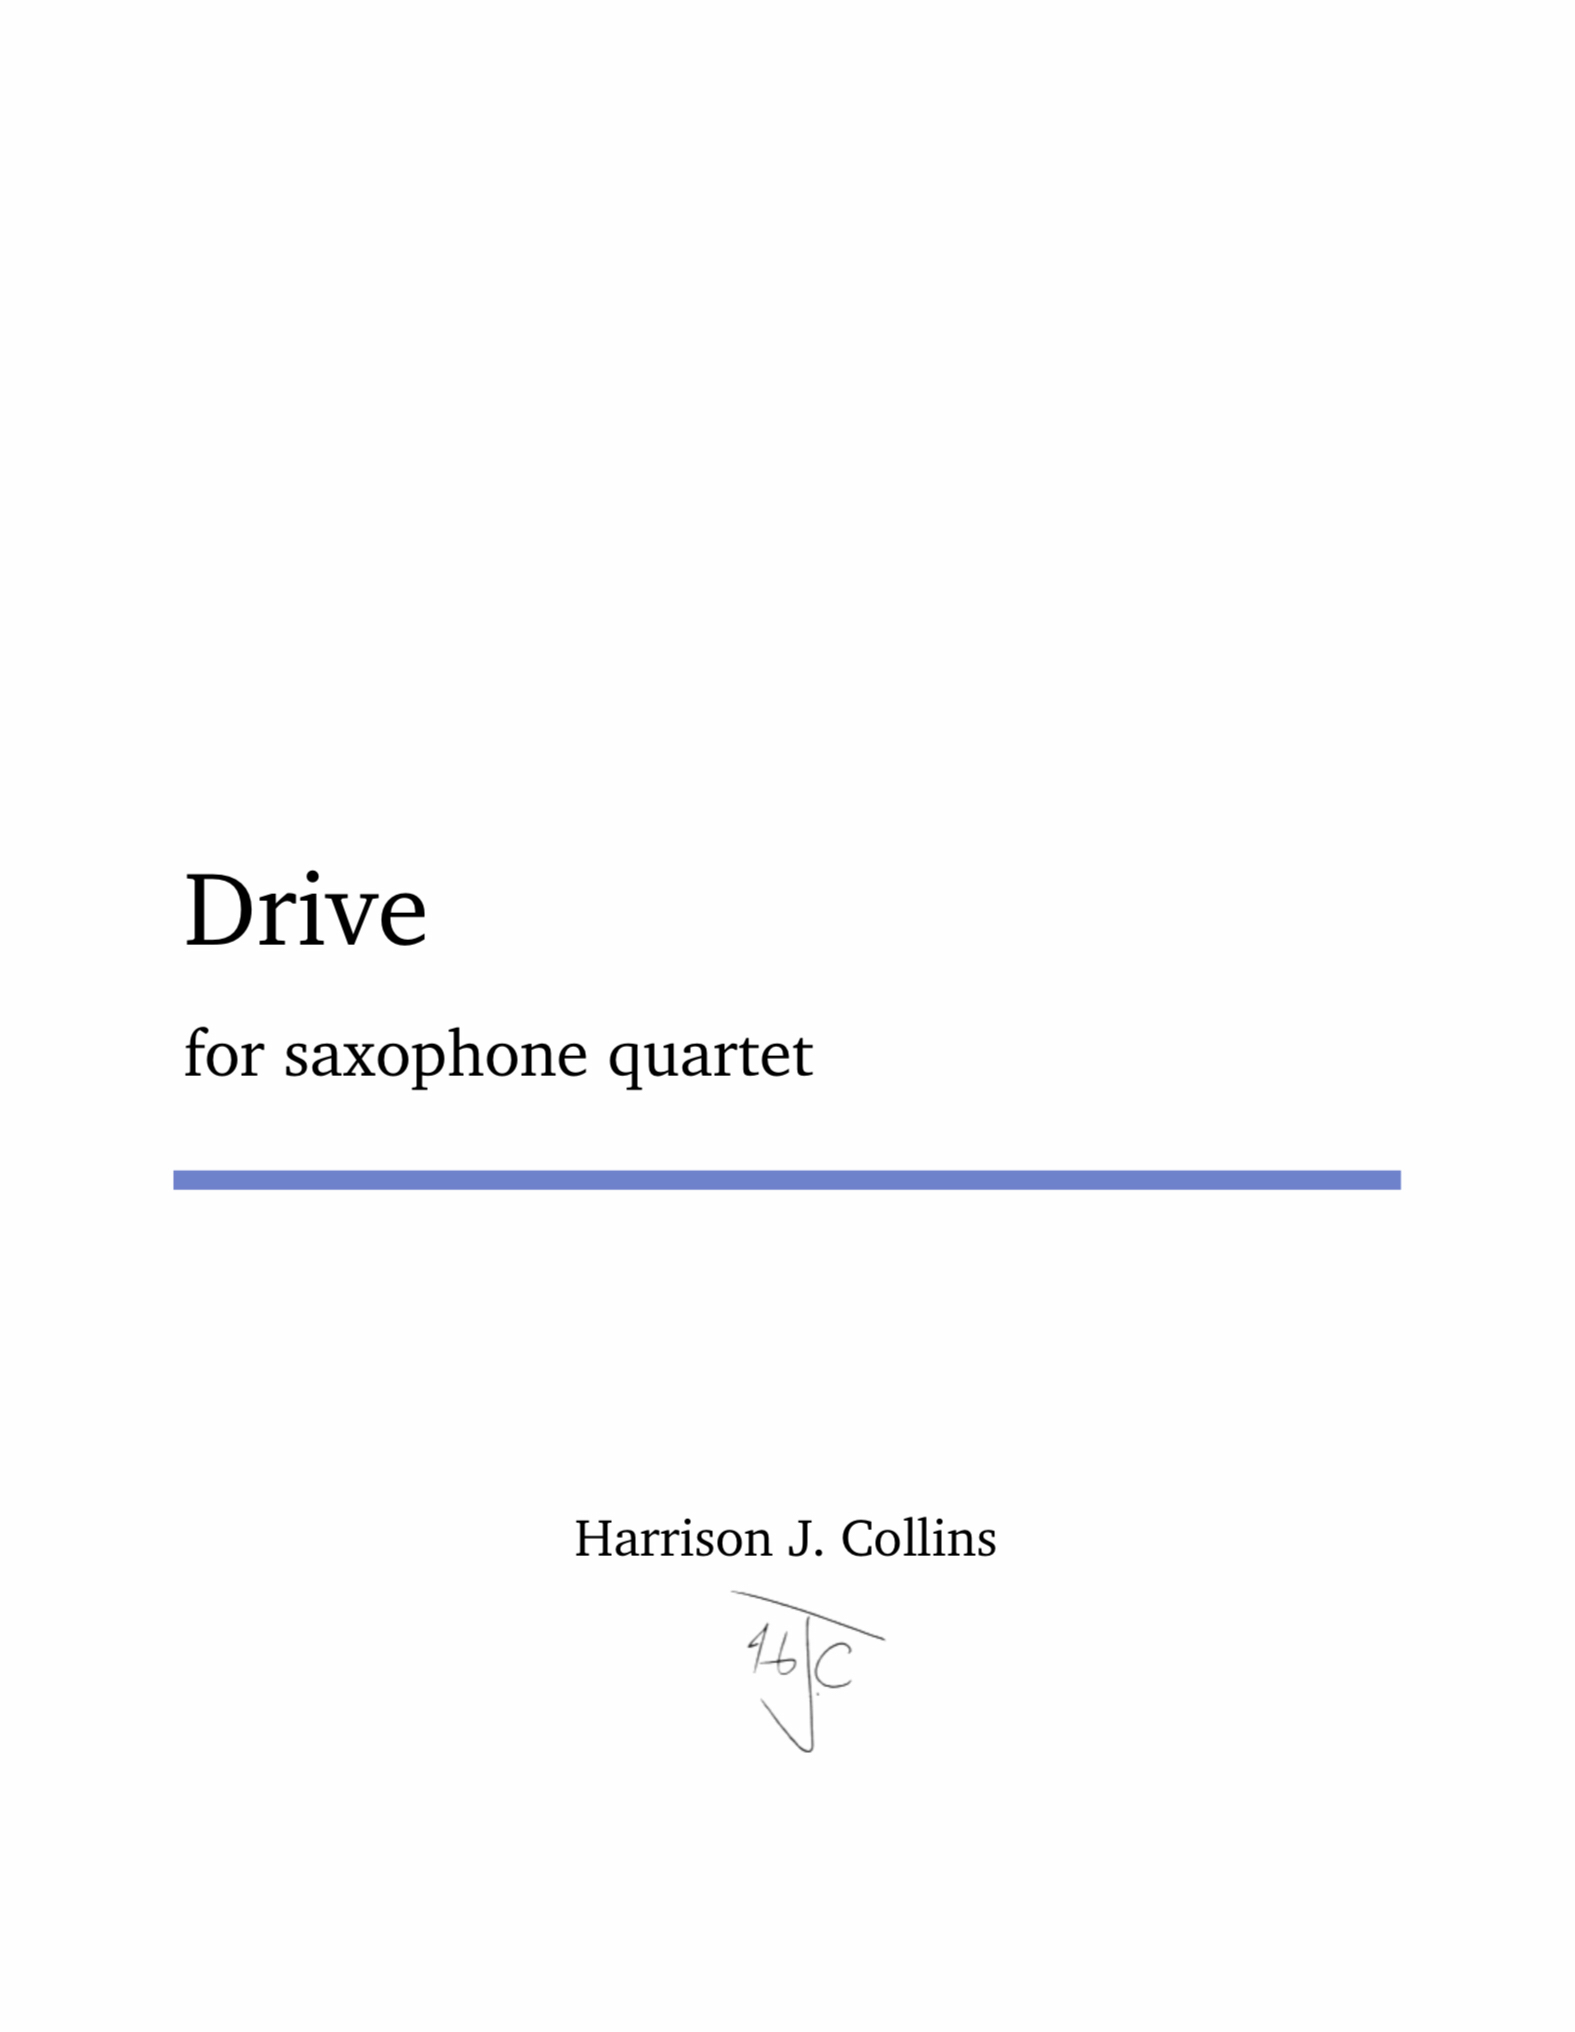 Drive by Harrison Collins